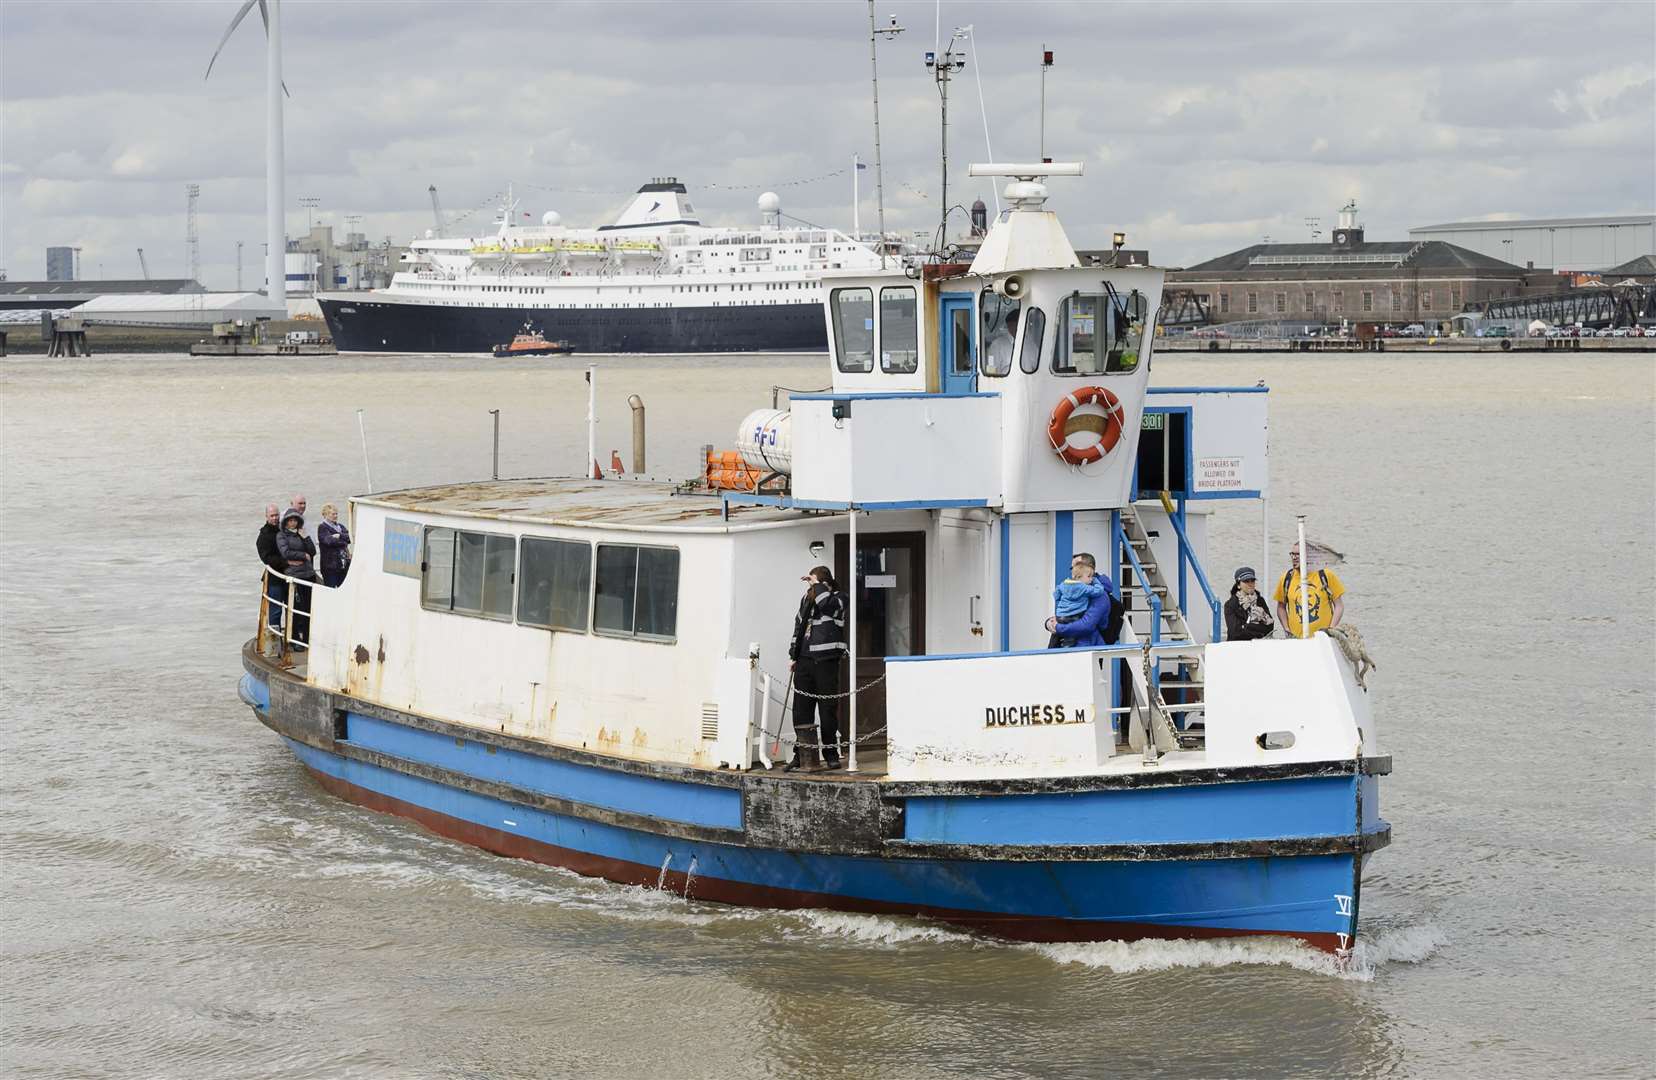 The Gravesend to Tilbury ferry service has a question mark over its future. Picture: Andy Payton